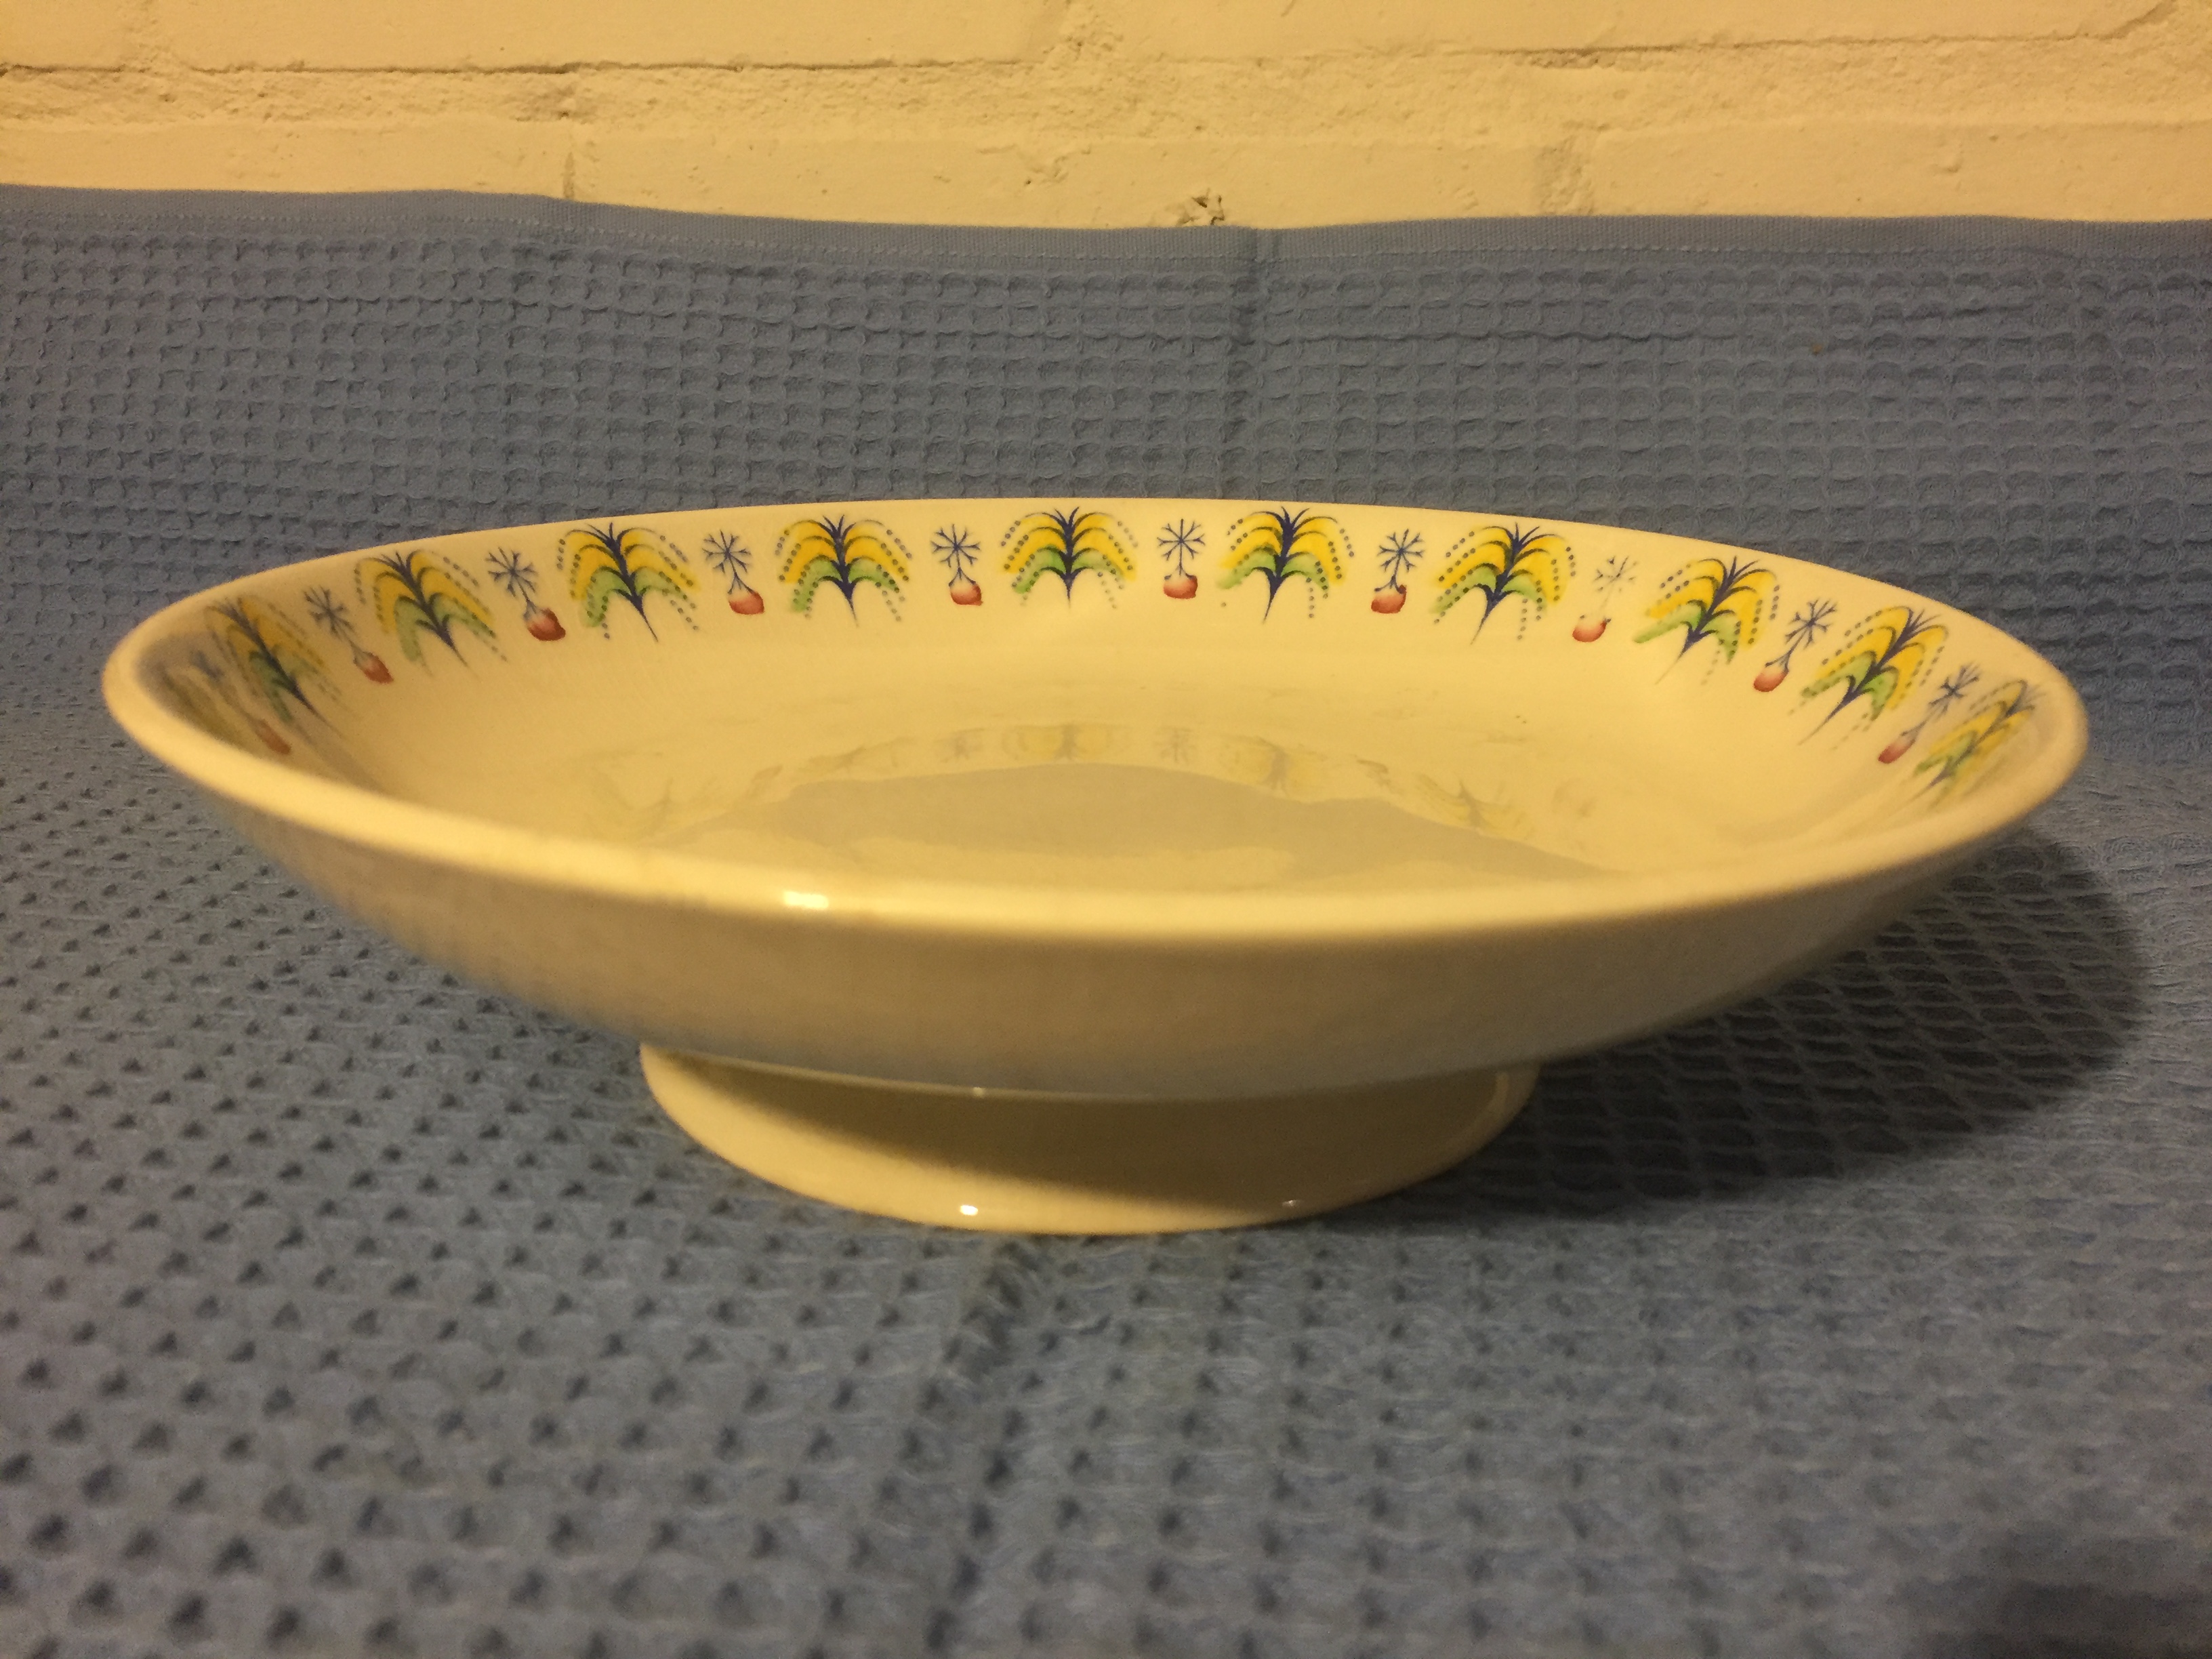 VERY EARLY 1920'S DESIGN CAKE STAND FROM THE UNION CASTLE LINE